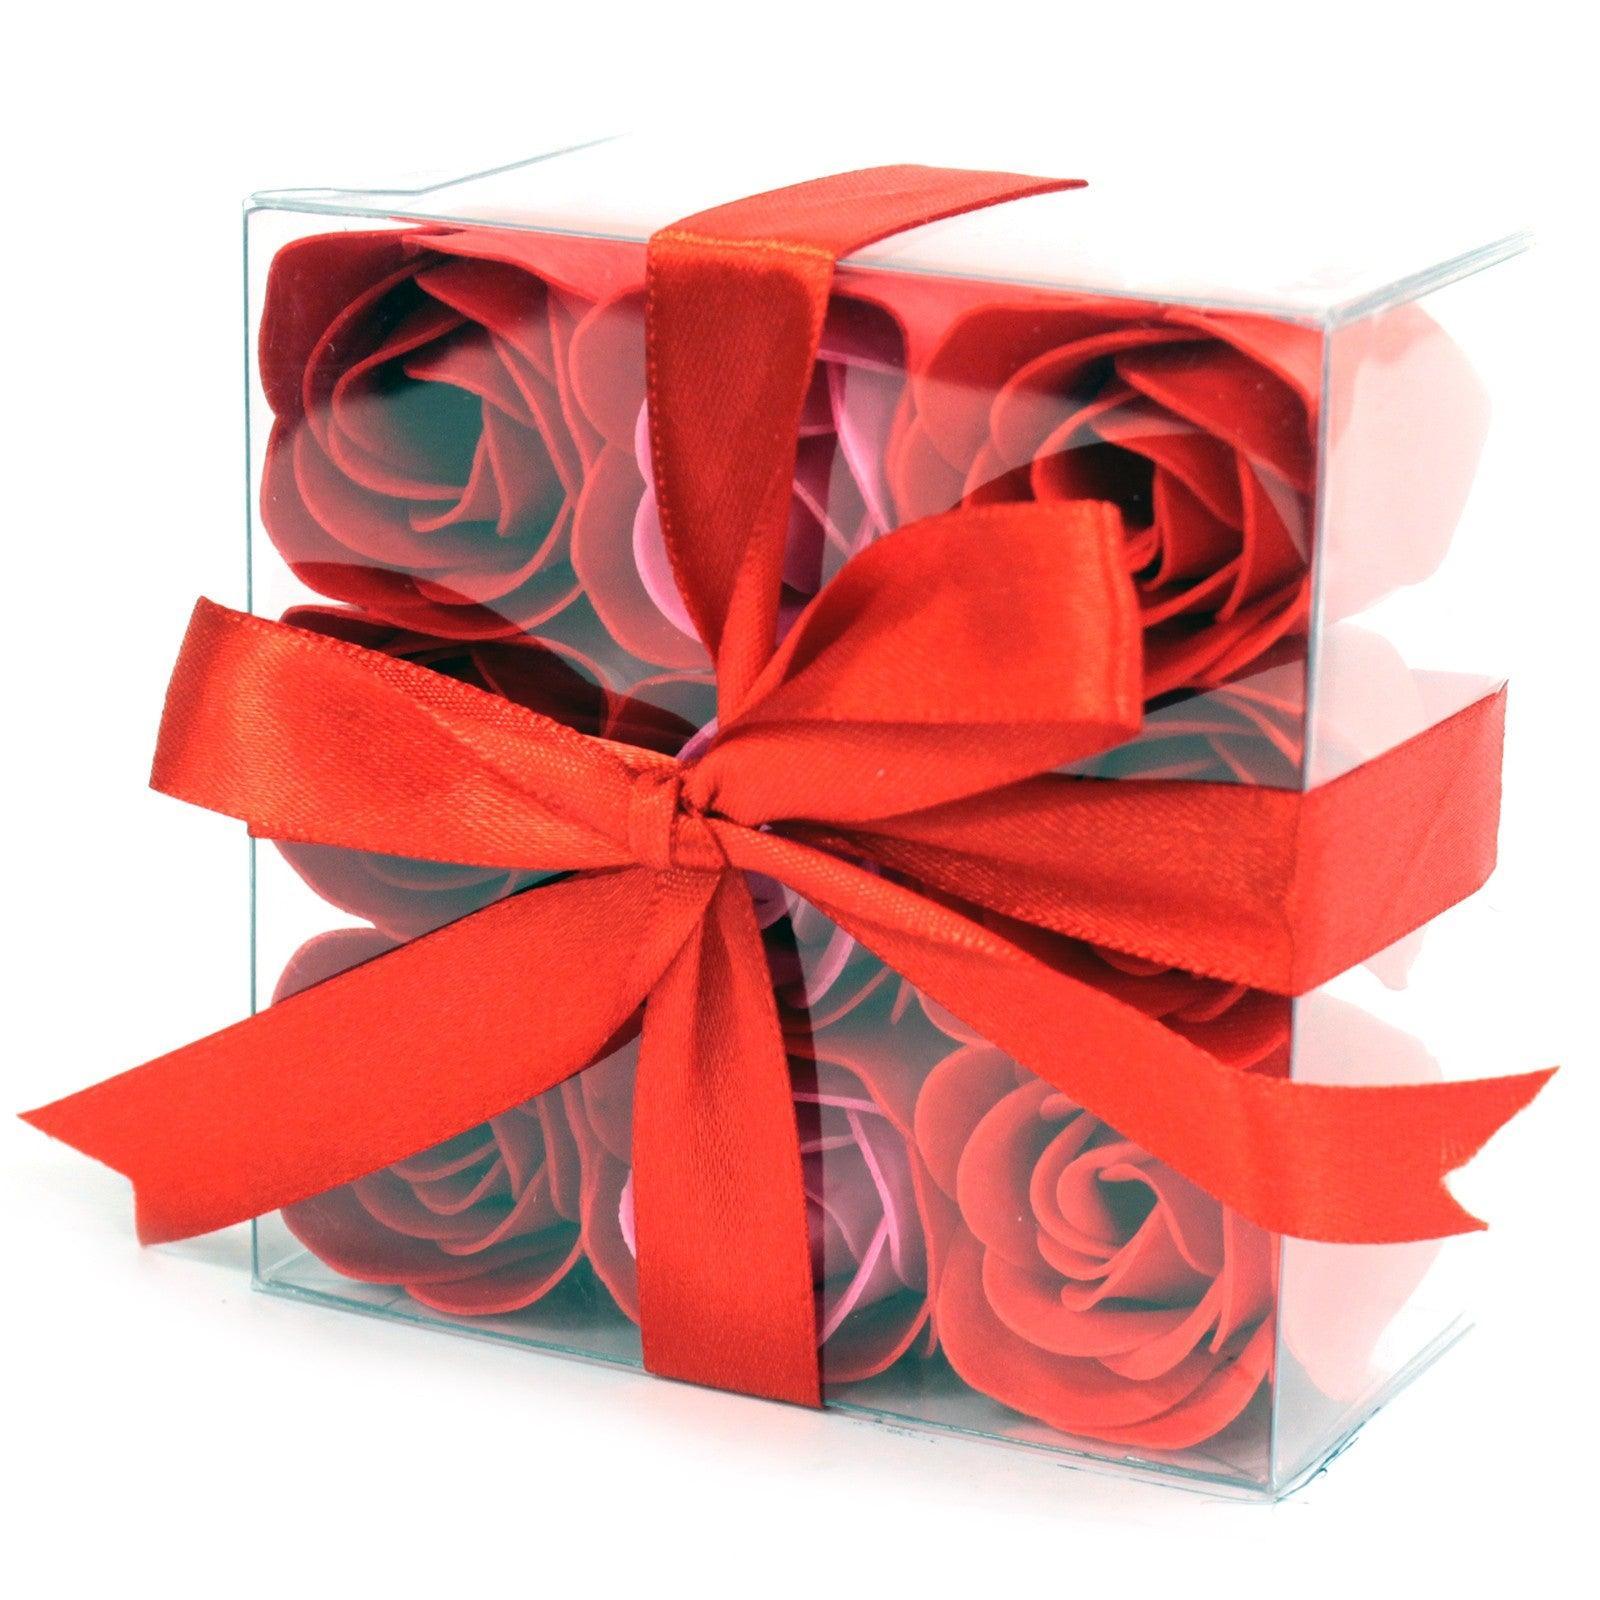 Romantic Gifts - DuvetDay.co.uk